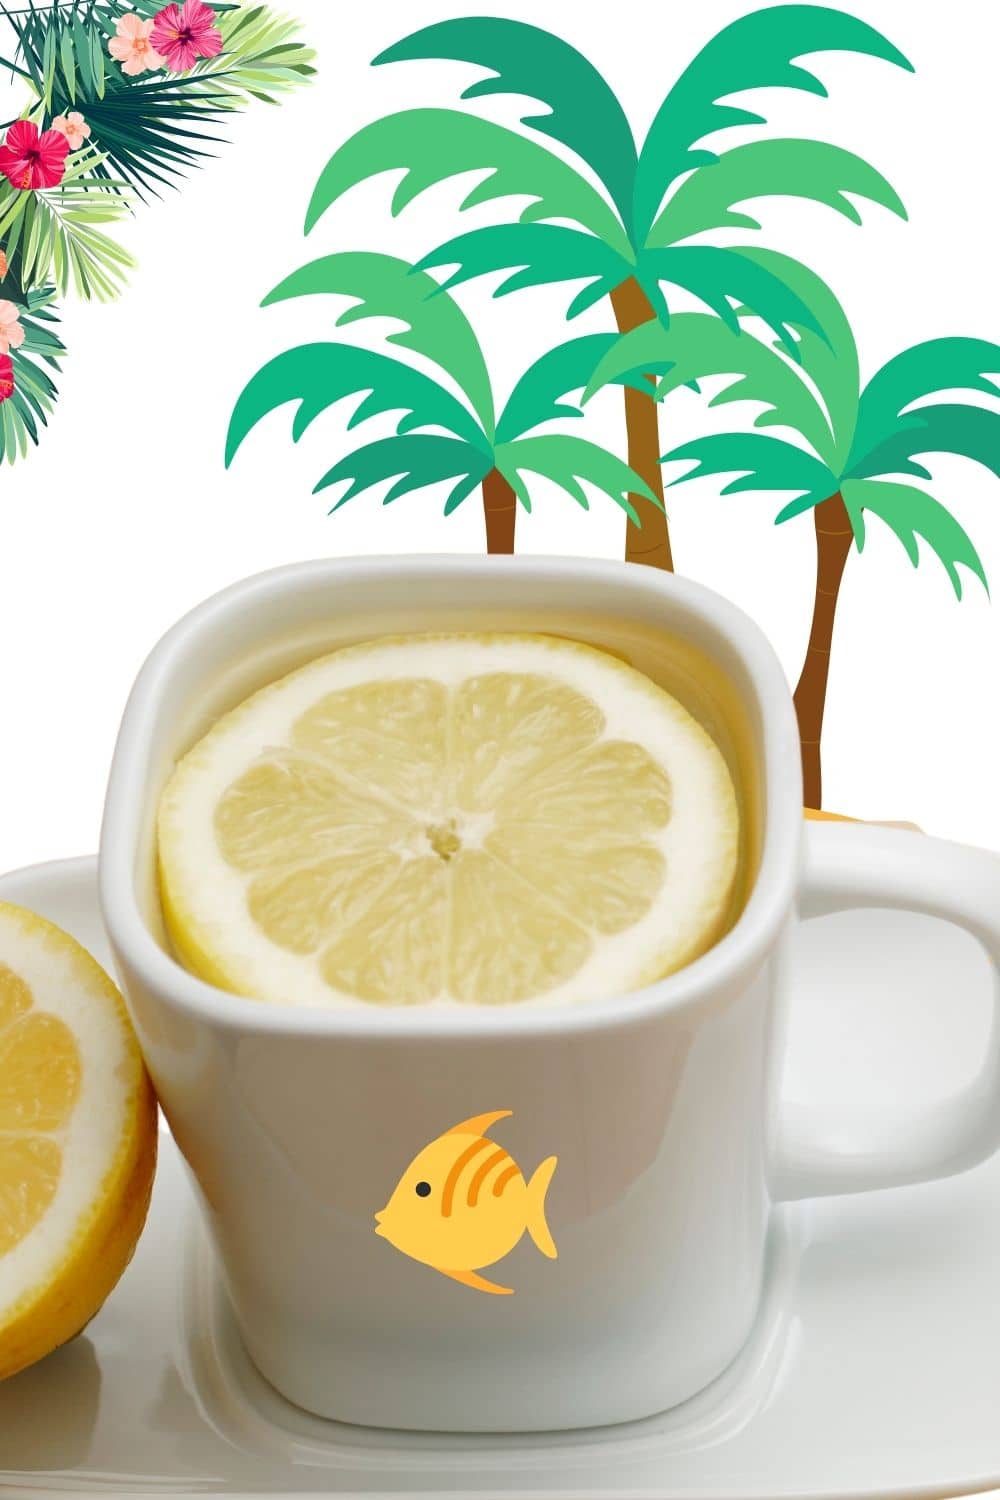 hot lemon water remedies when travel causes constipation